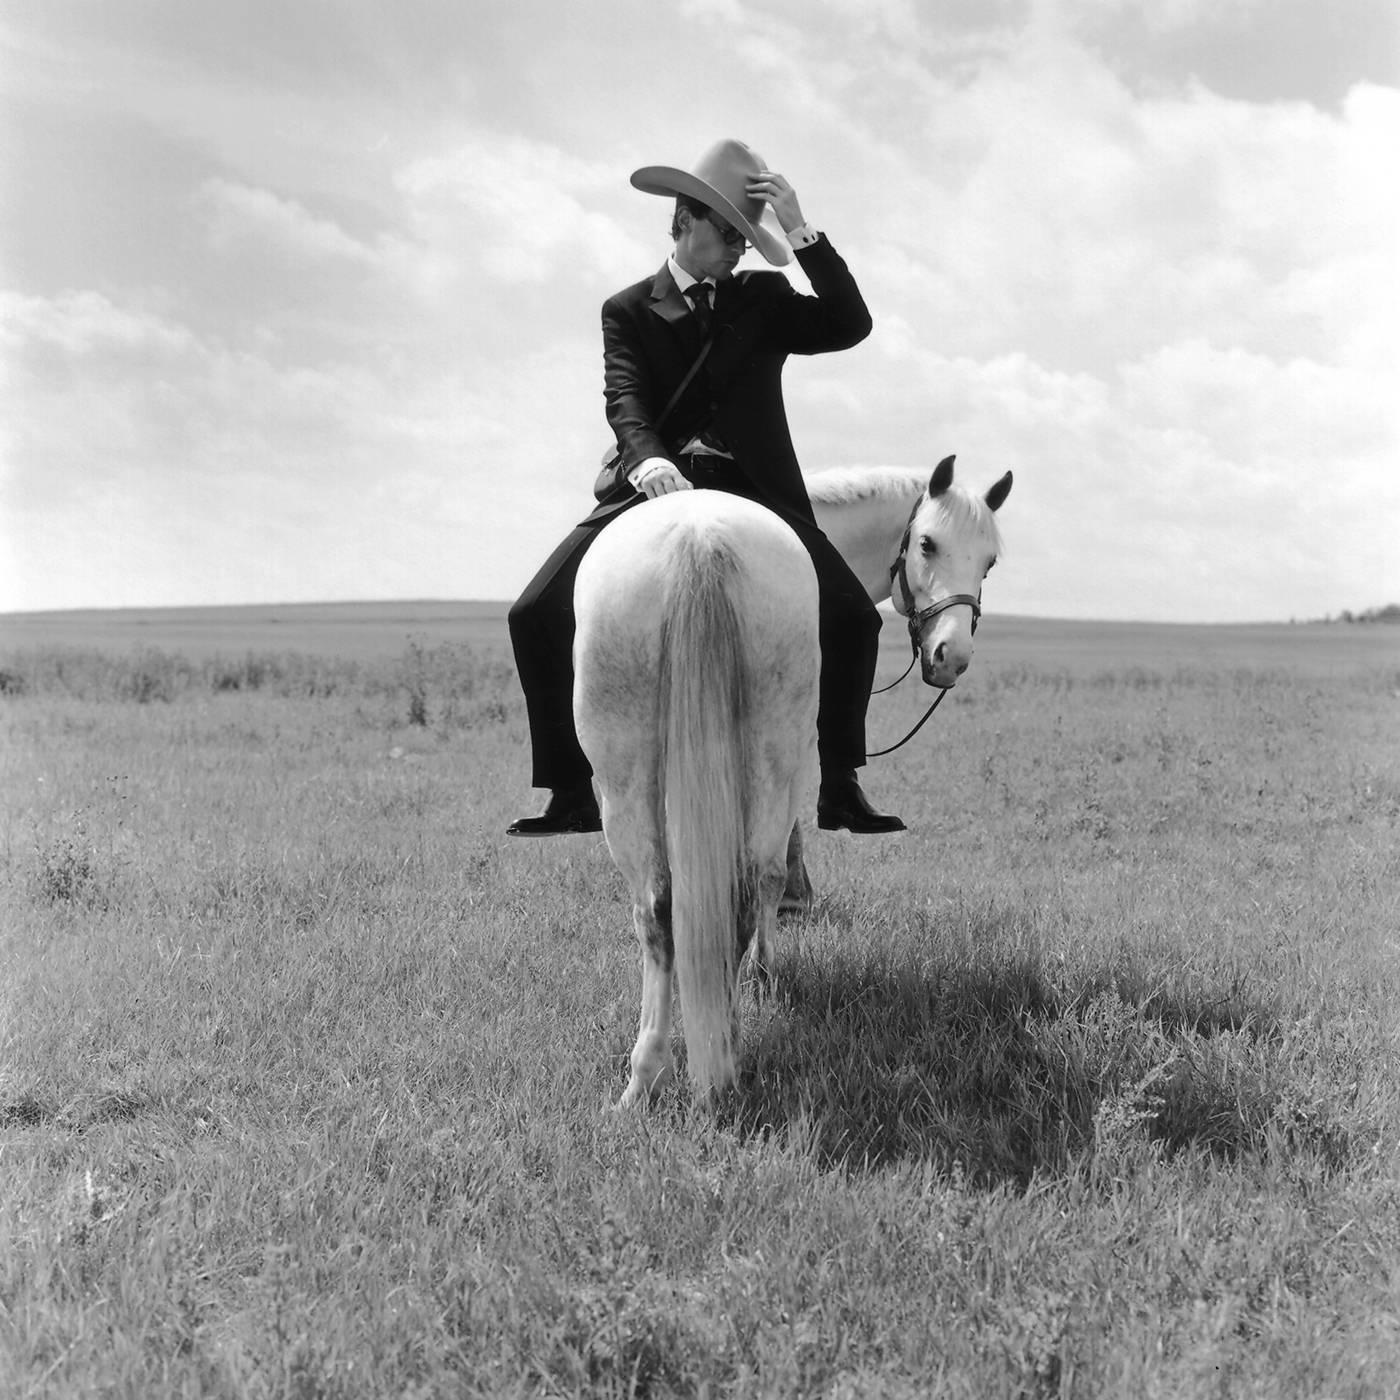 Rodney Smith Black and White Photograph - Greg on Horse Backwards, Alberta, Canada - 20 x 20 inches